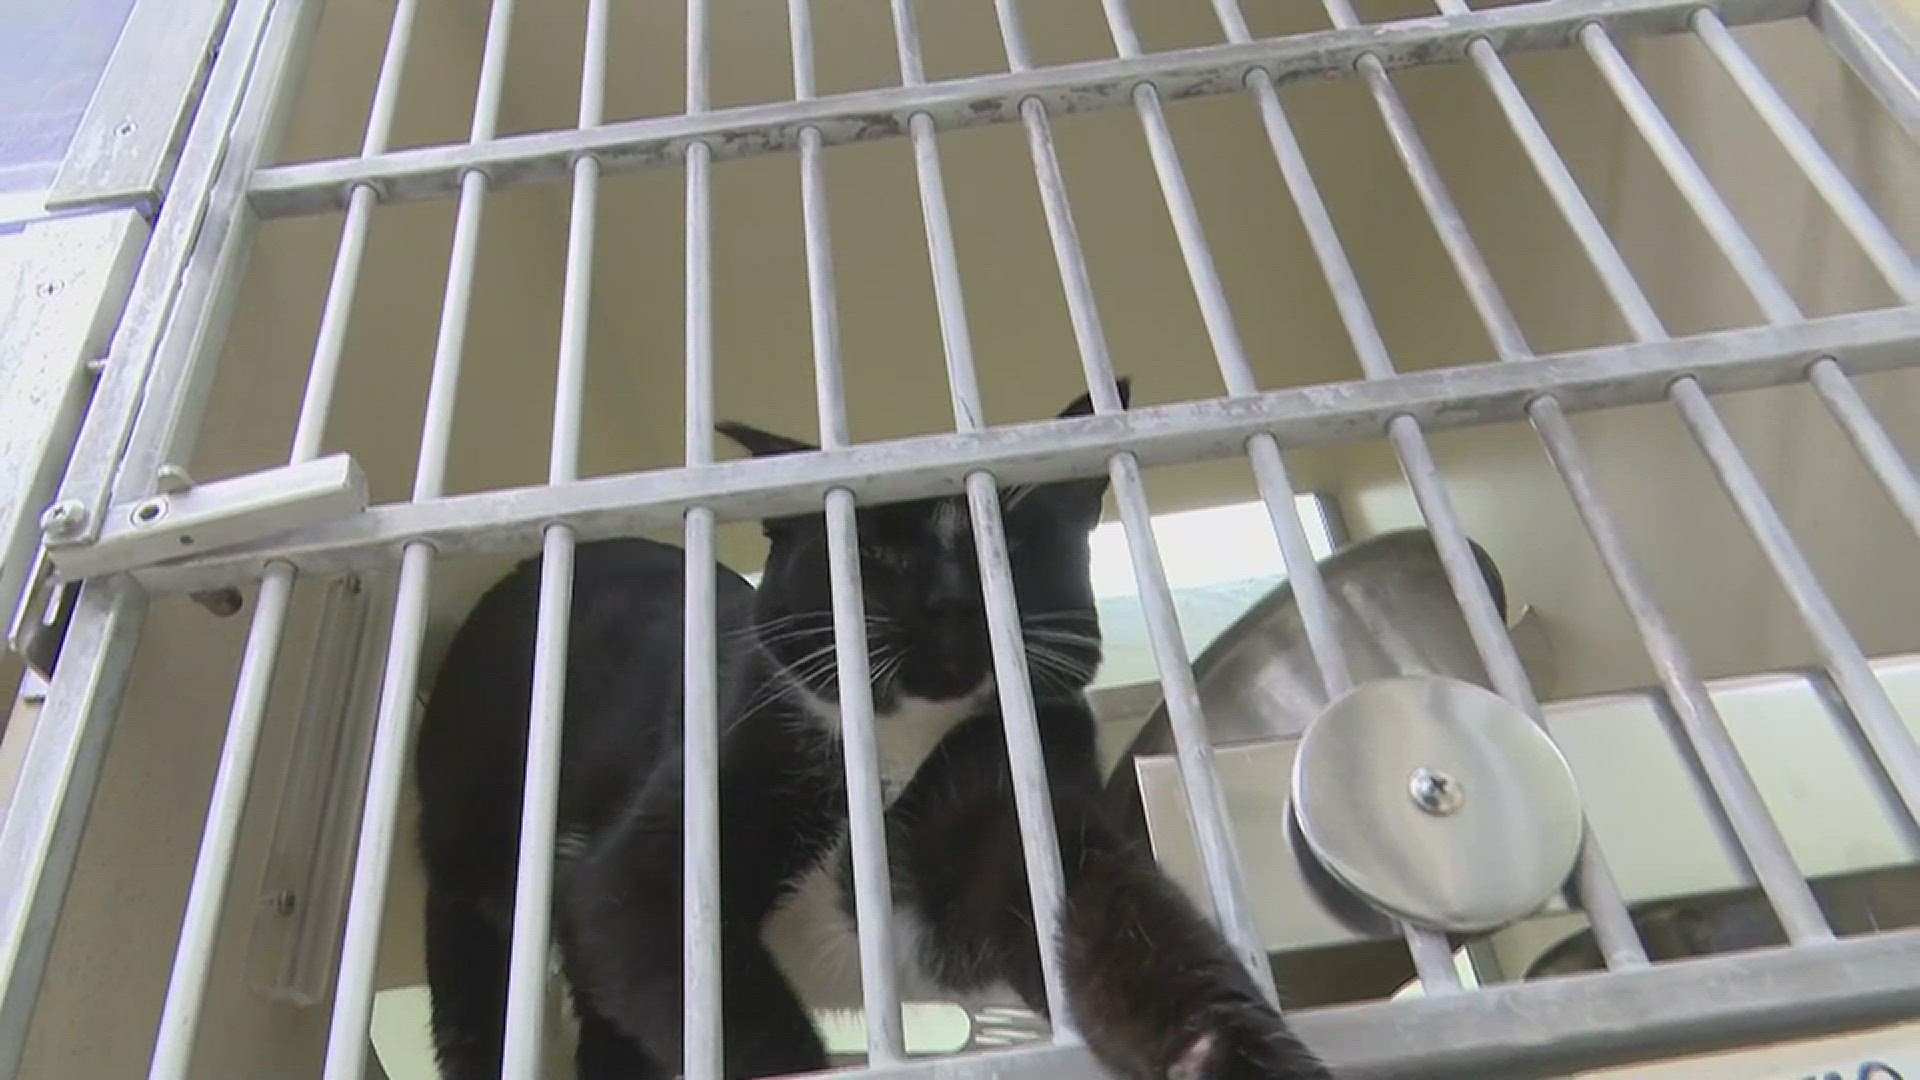 A Pueblo homeowner surrendered 34 cats and kittens this week to the Humane Society of the Pikes Peak Region.